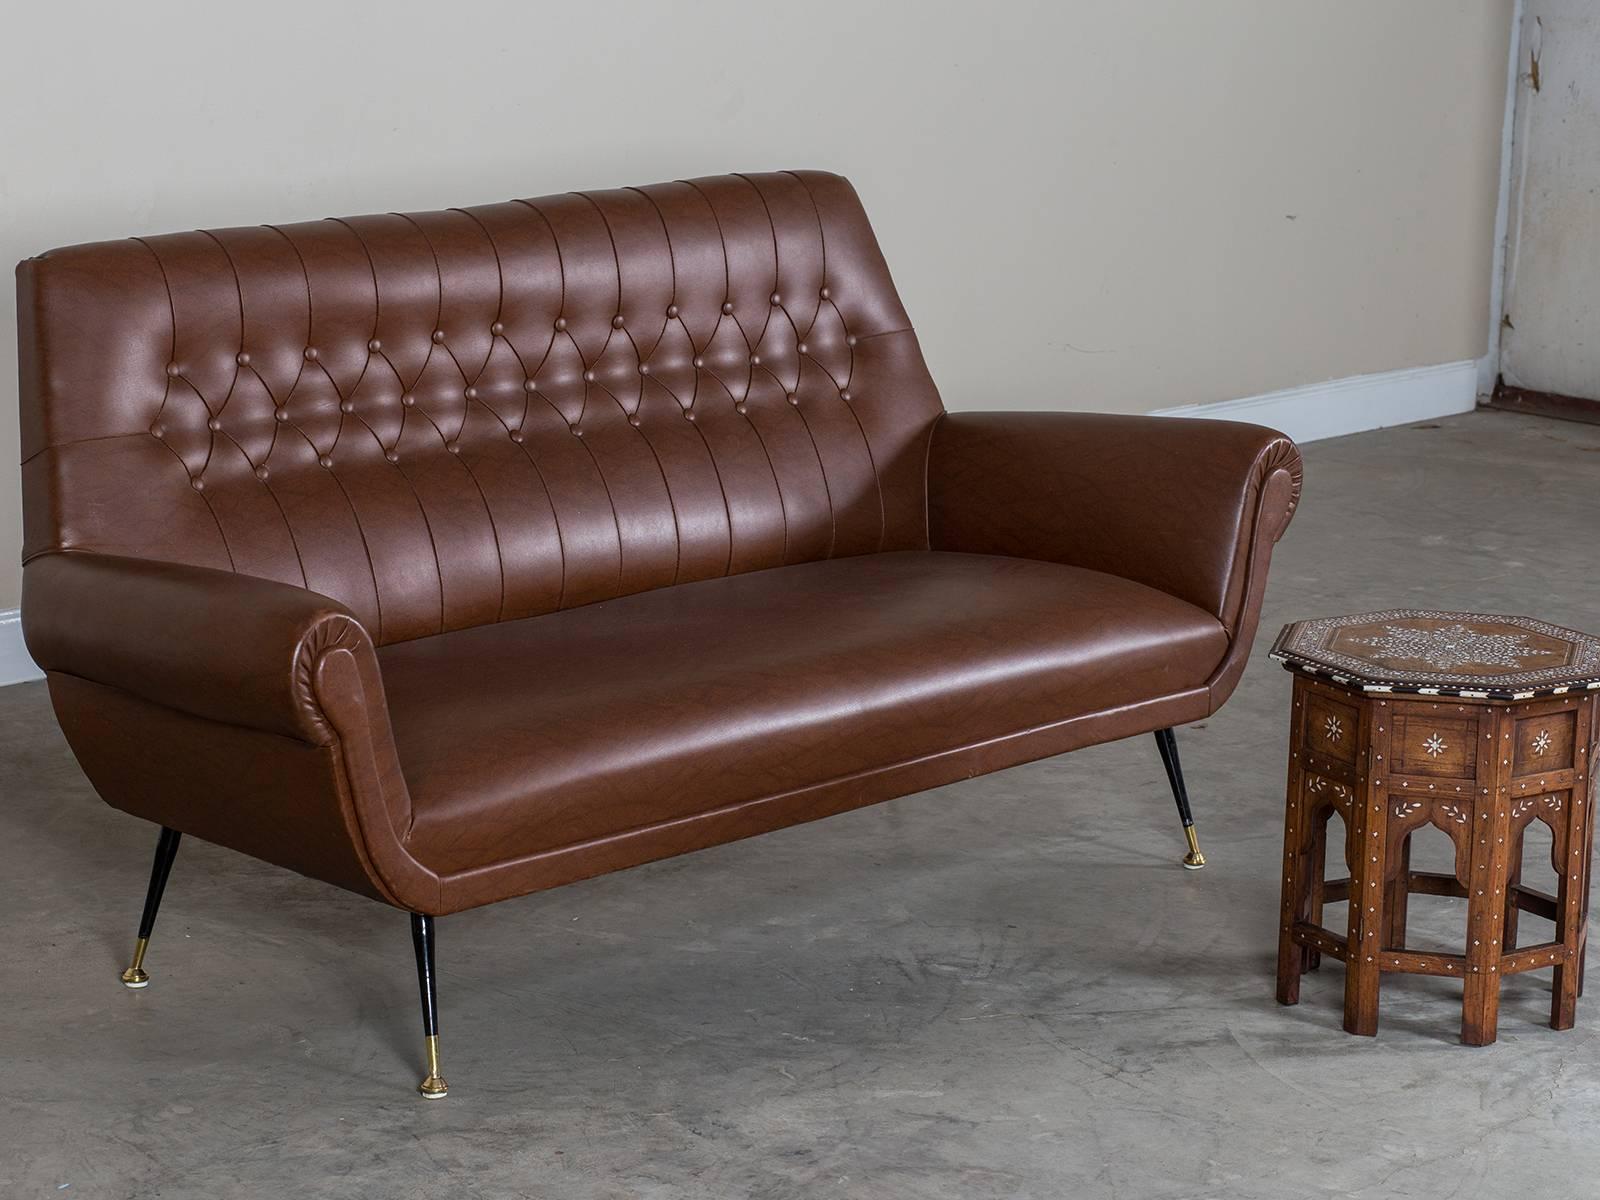 Receive our new selections direct from 1stdibs by email each week. Please click Follow Dealer below and see them first!

The stylish profile of this sofa are immediately identifiable as Italian in origin.  The sofa stands upon four metal legs set